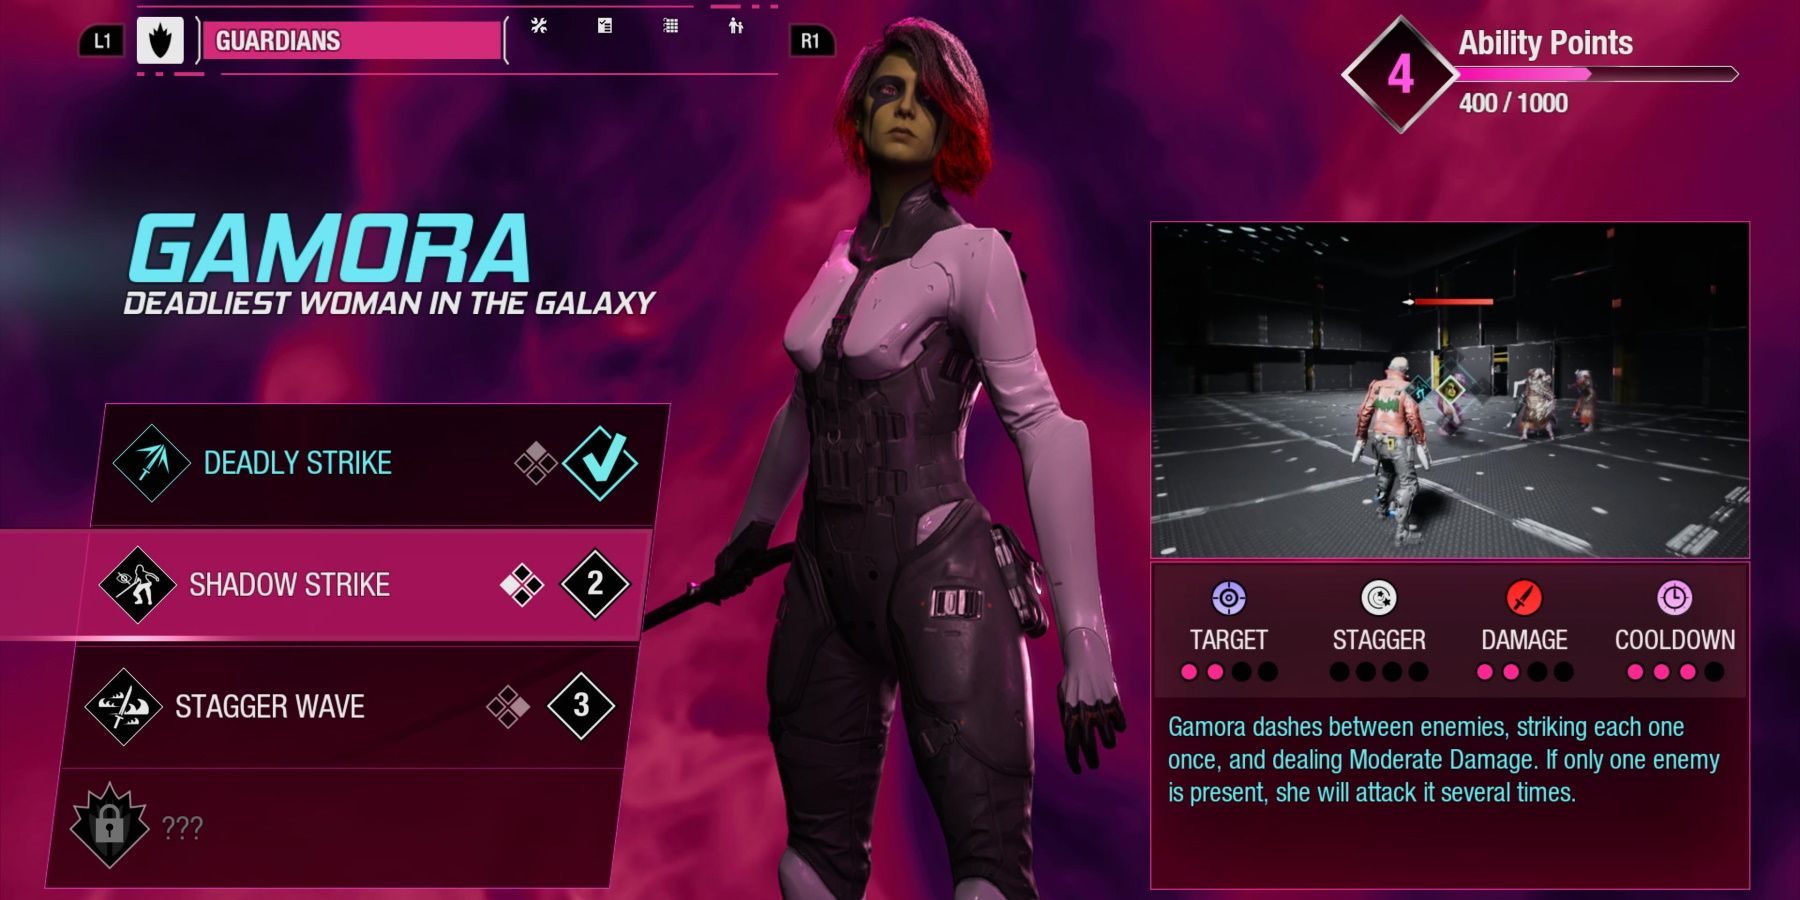 Marvel’s Guardians of The Galaxy gamora ability screen